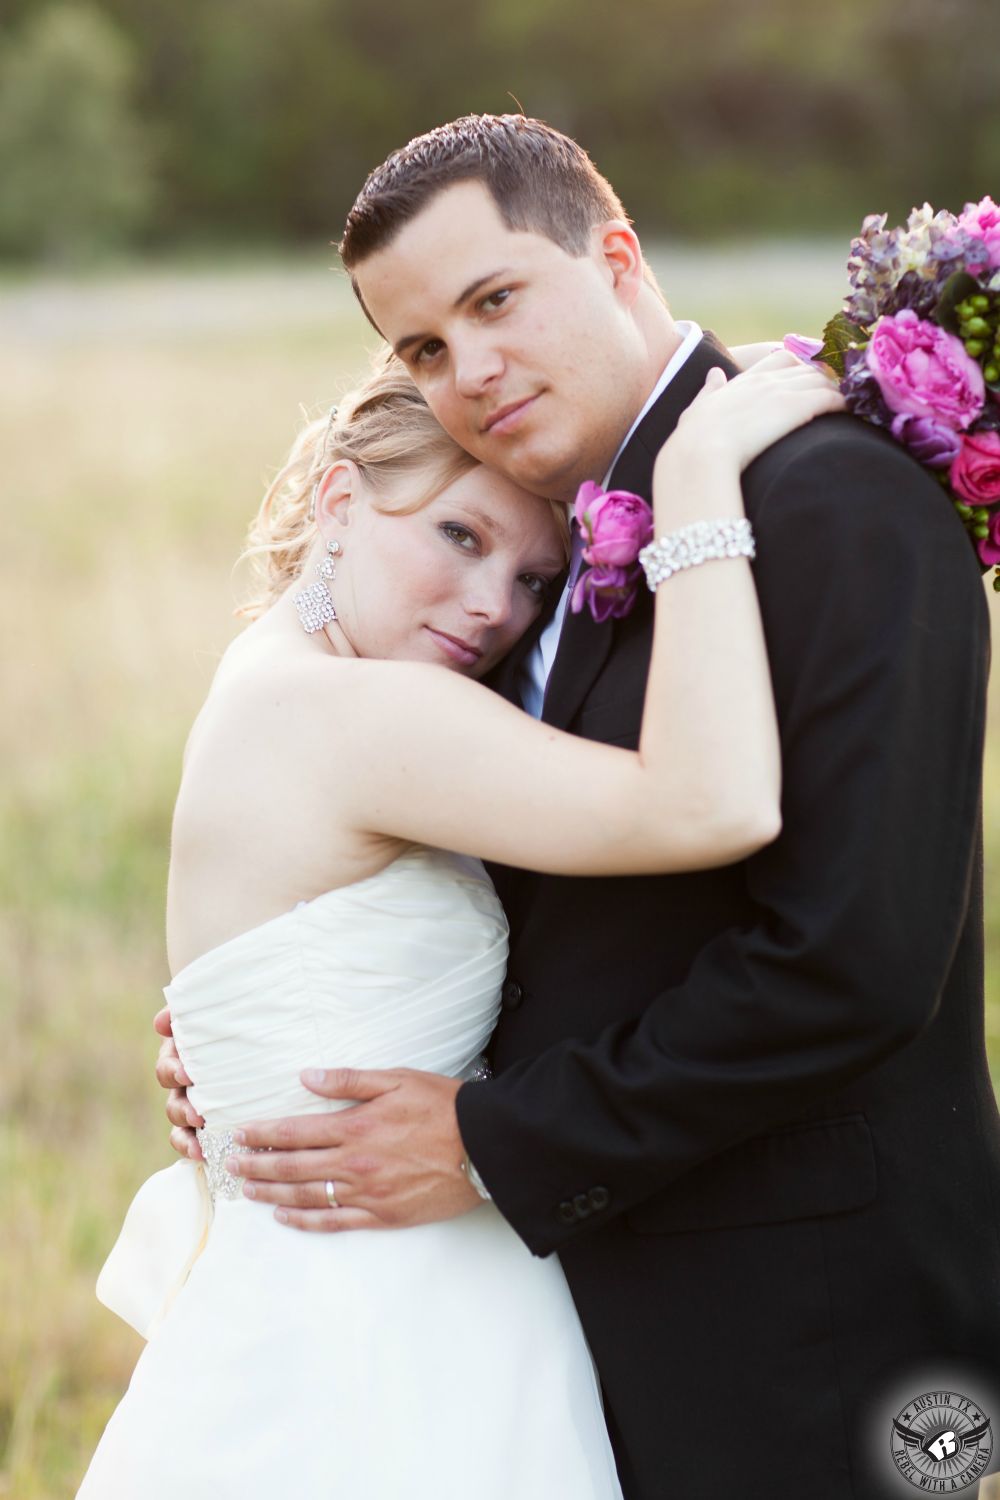 Blonde bride with intense gaze and magenta bouquet embraces groom with pink boutonniere in a field at Texas Old Town before getting married at Tejas Hall.